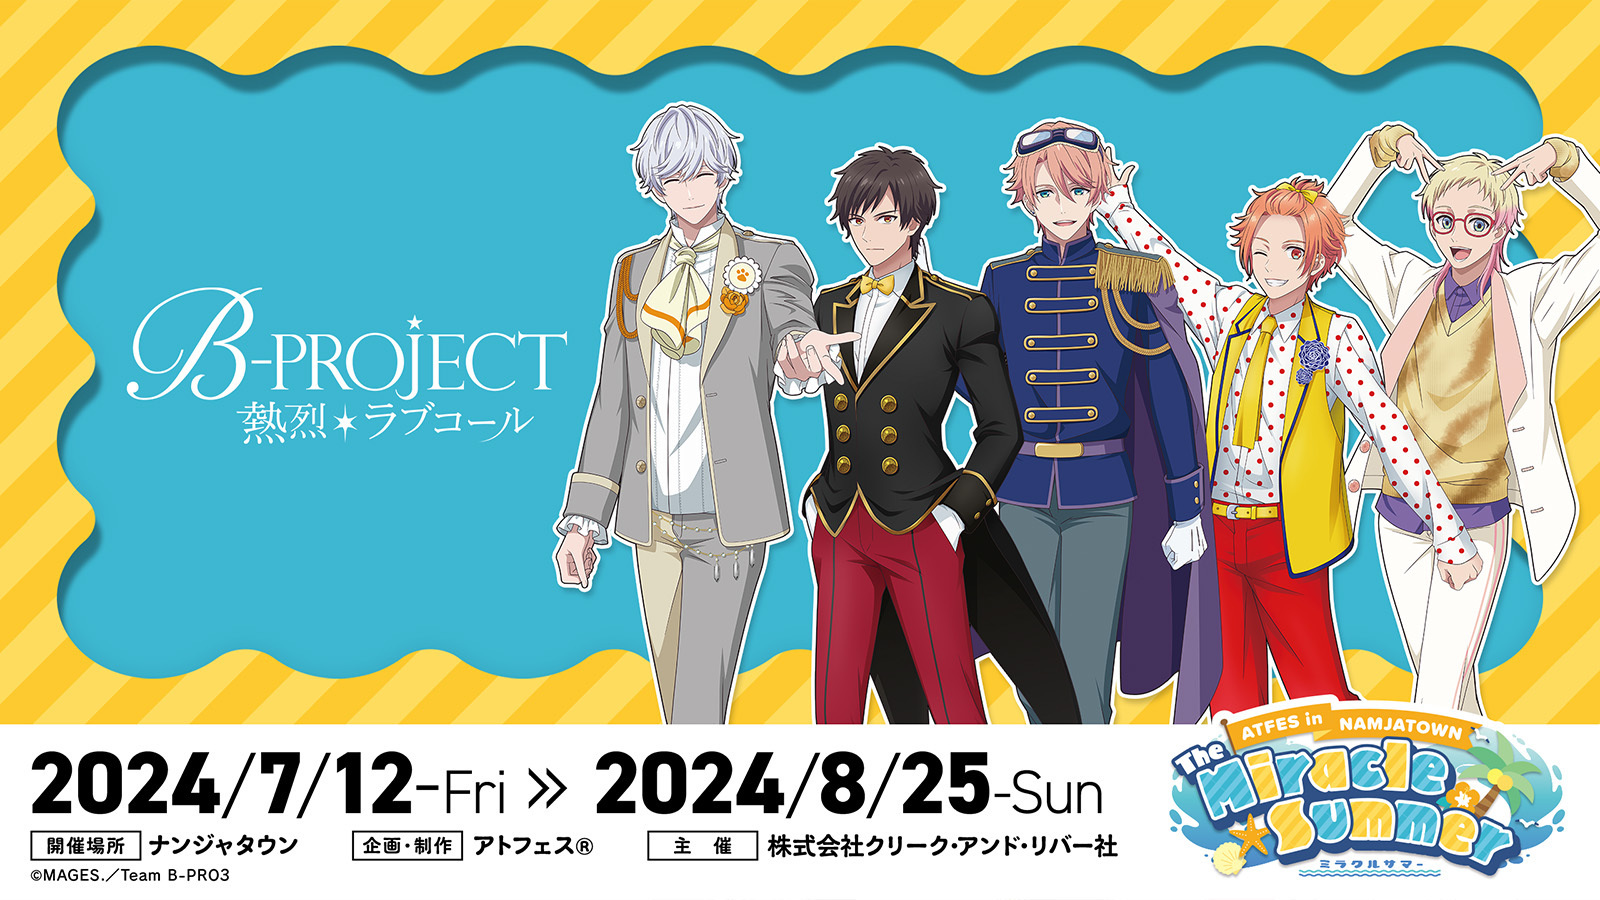 ATFES in NAMJATOWN The Miracle Summer『B-PROJECT ～熱烈＊ラブコール～』